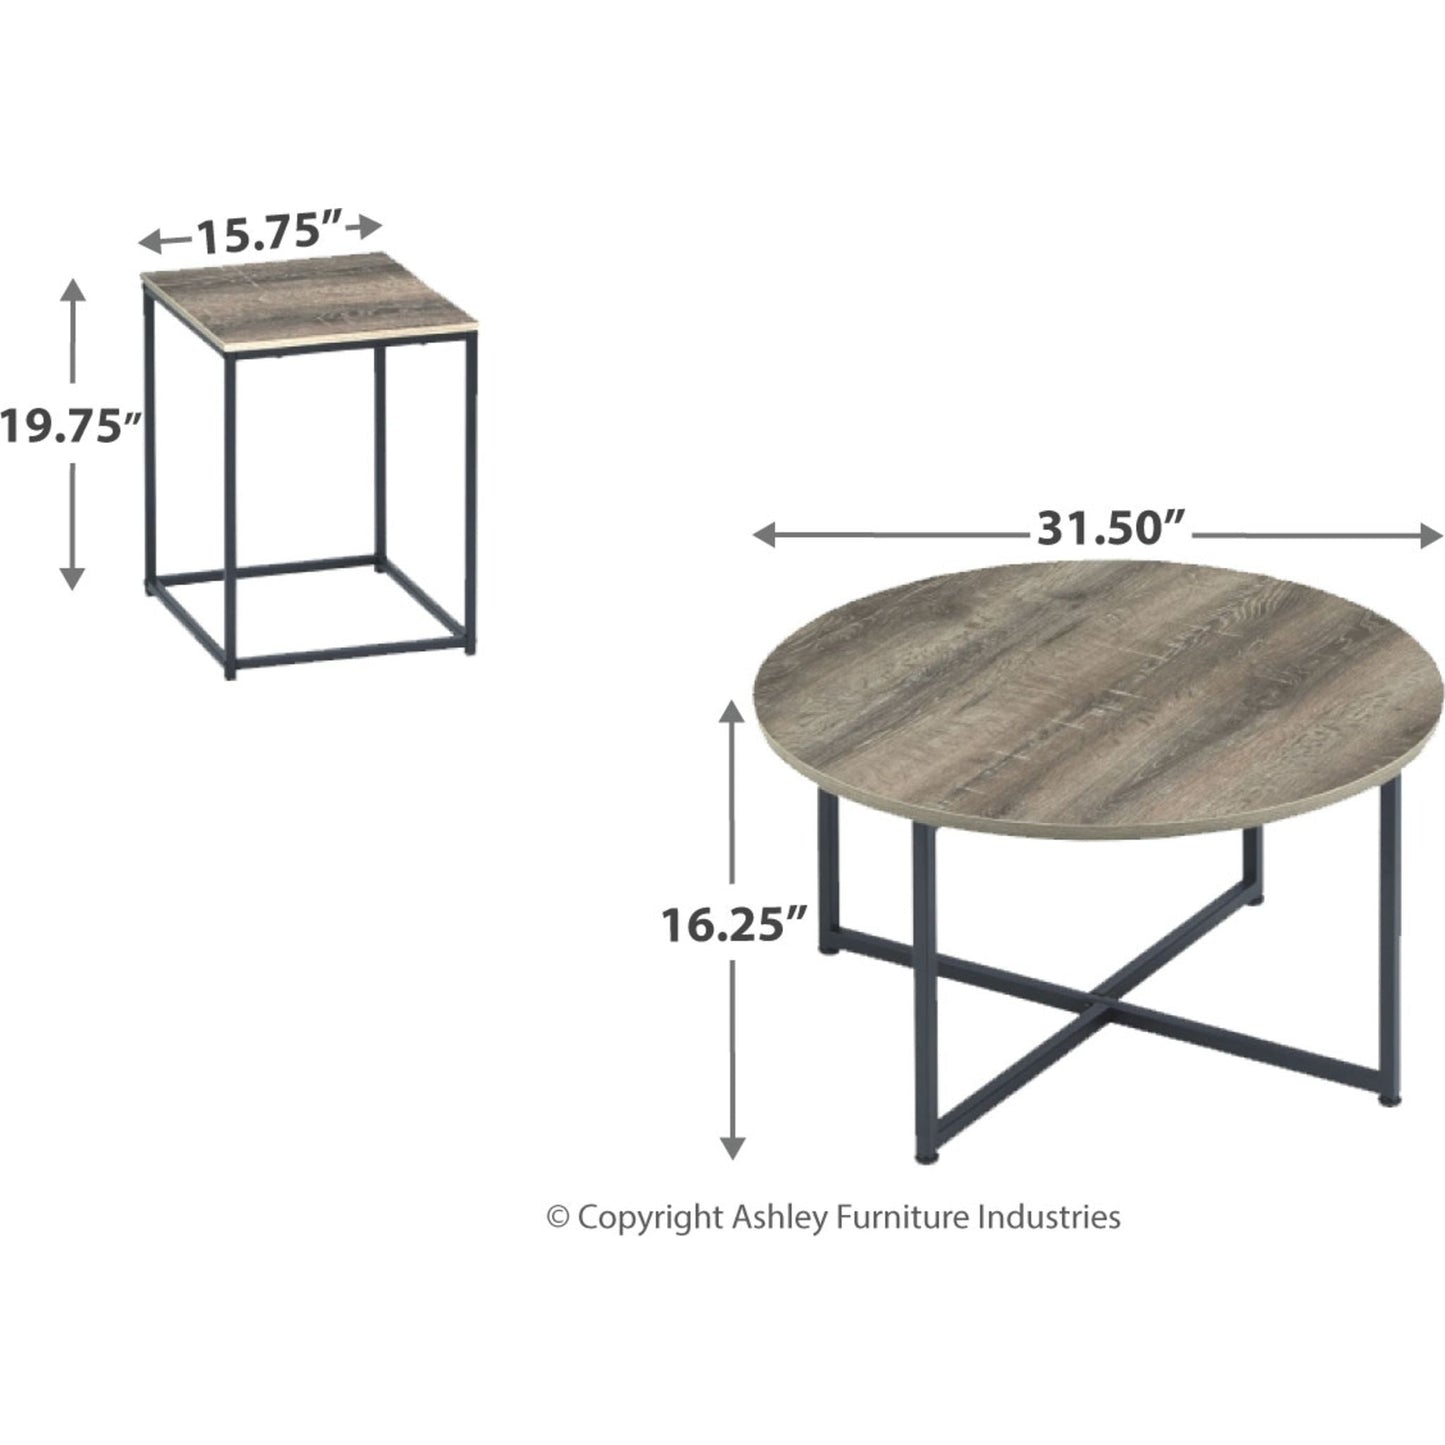 Wadeworth 3 Pack Tables - Two-tone